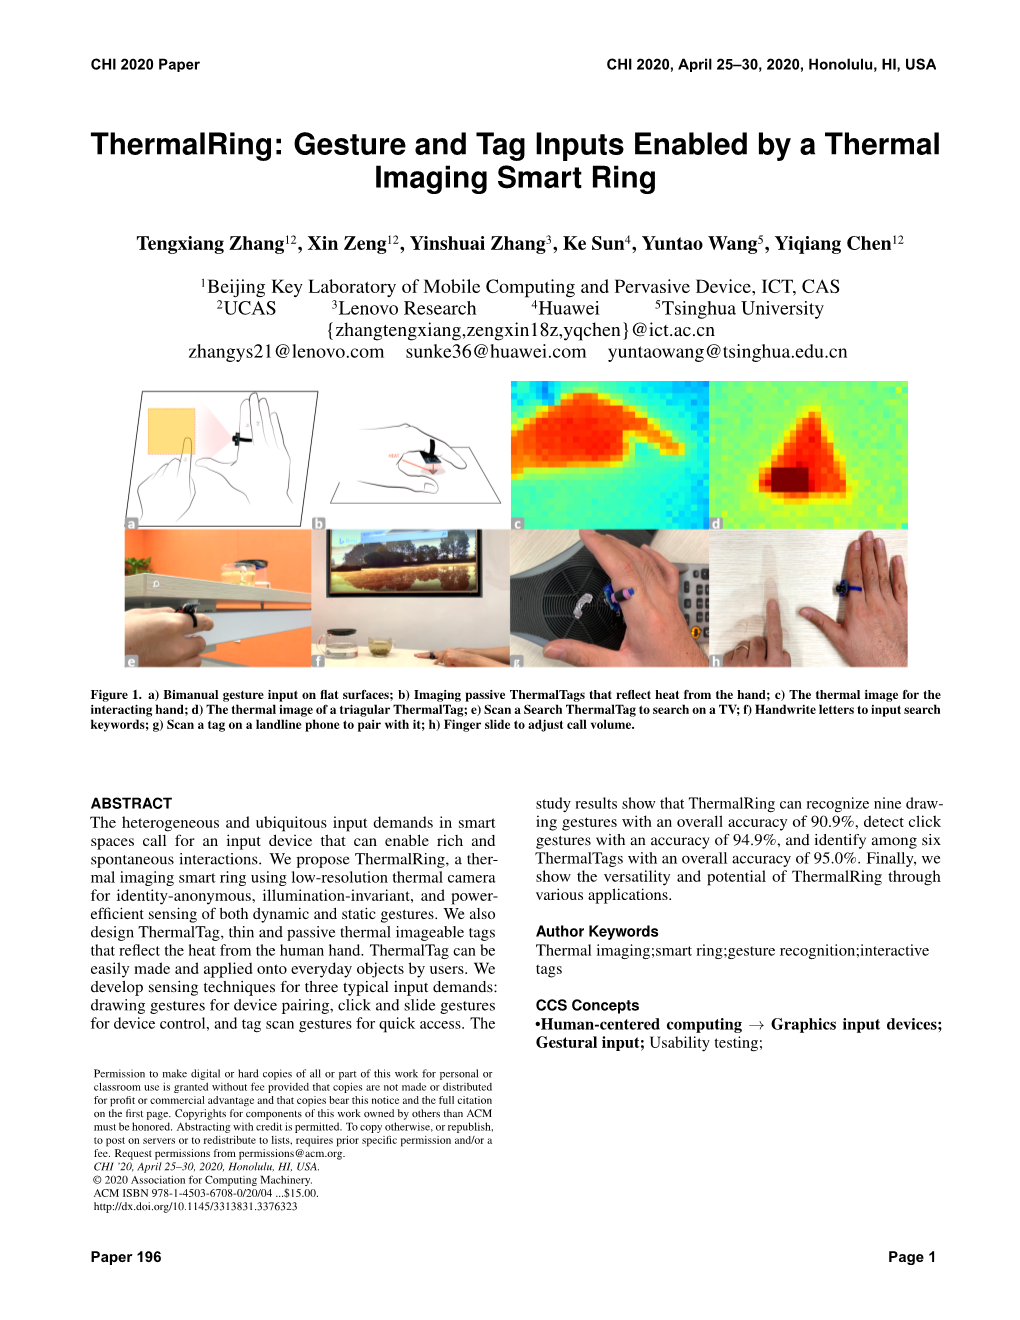 Thermalring: Gesture and Tag Inputs Enabled by a Thermal Imaging Smart Ring